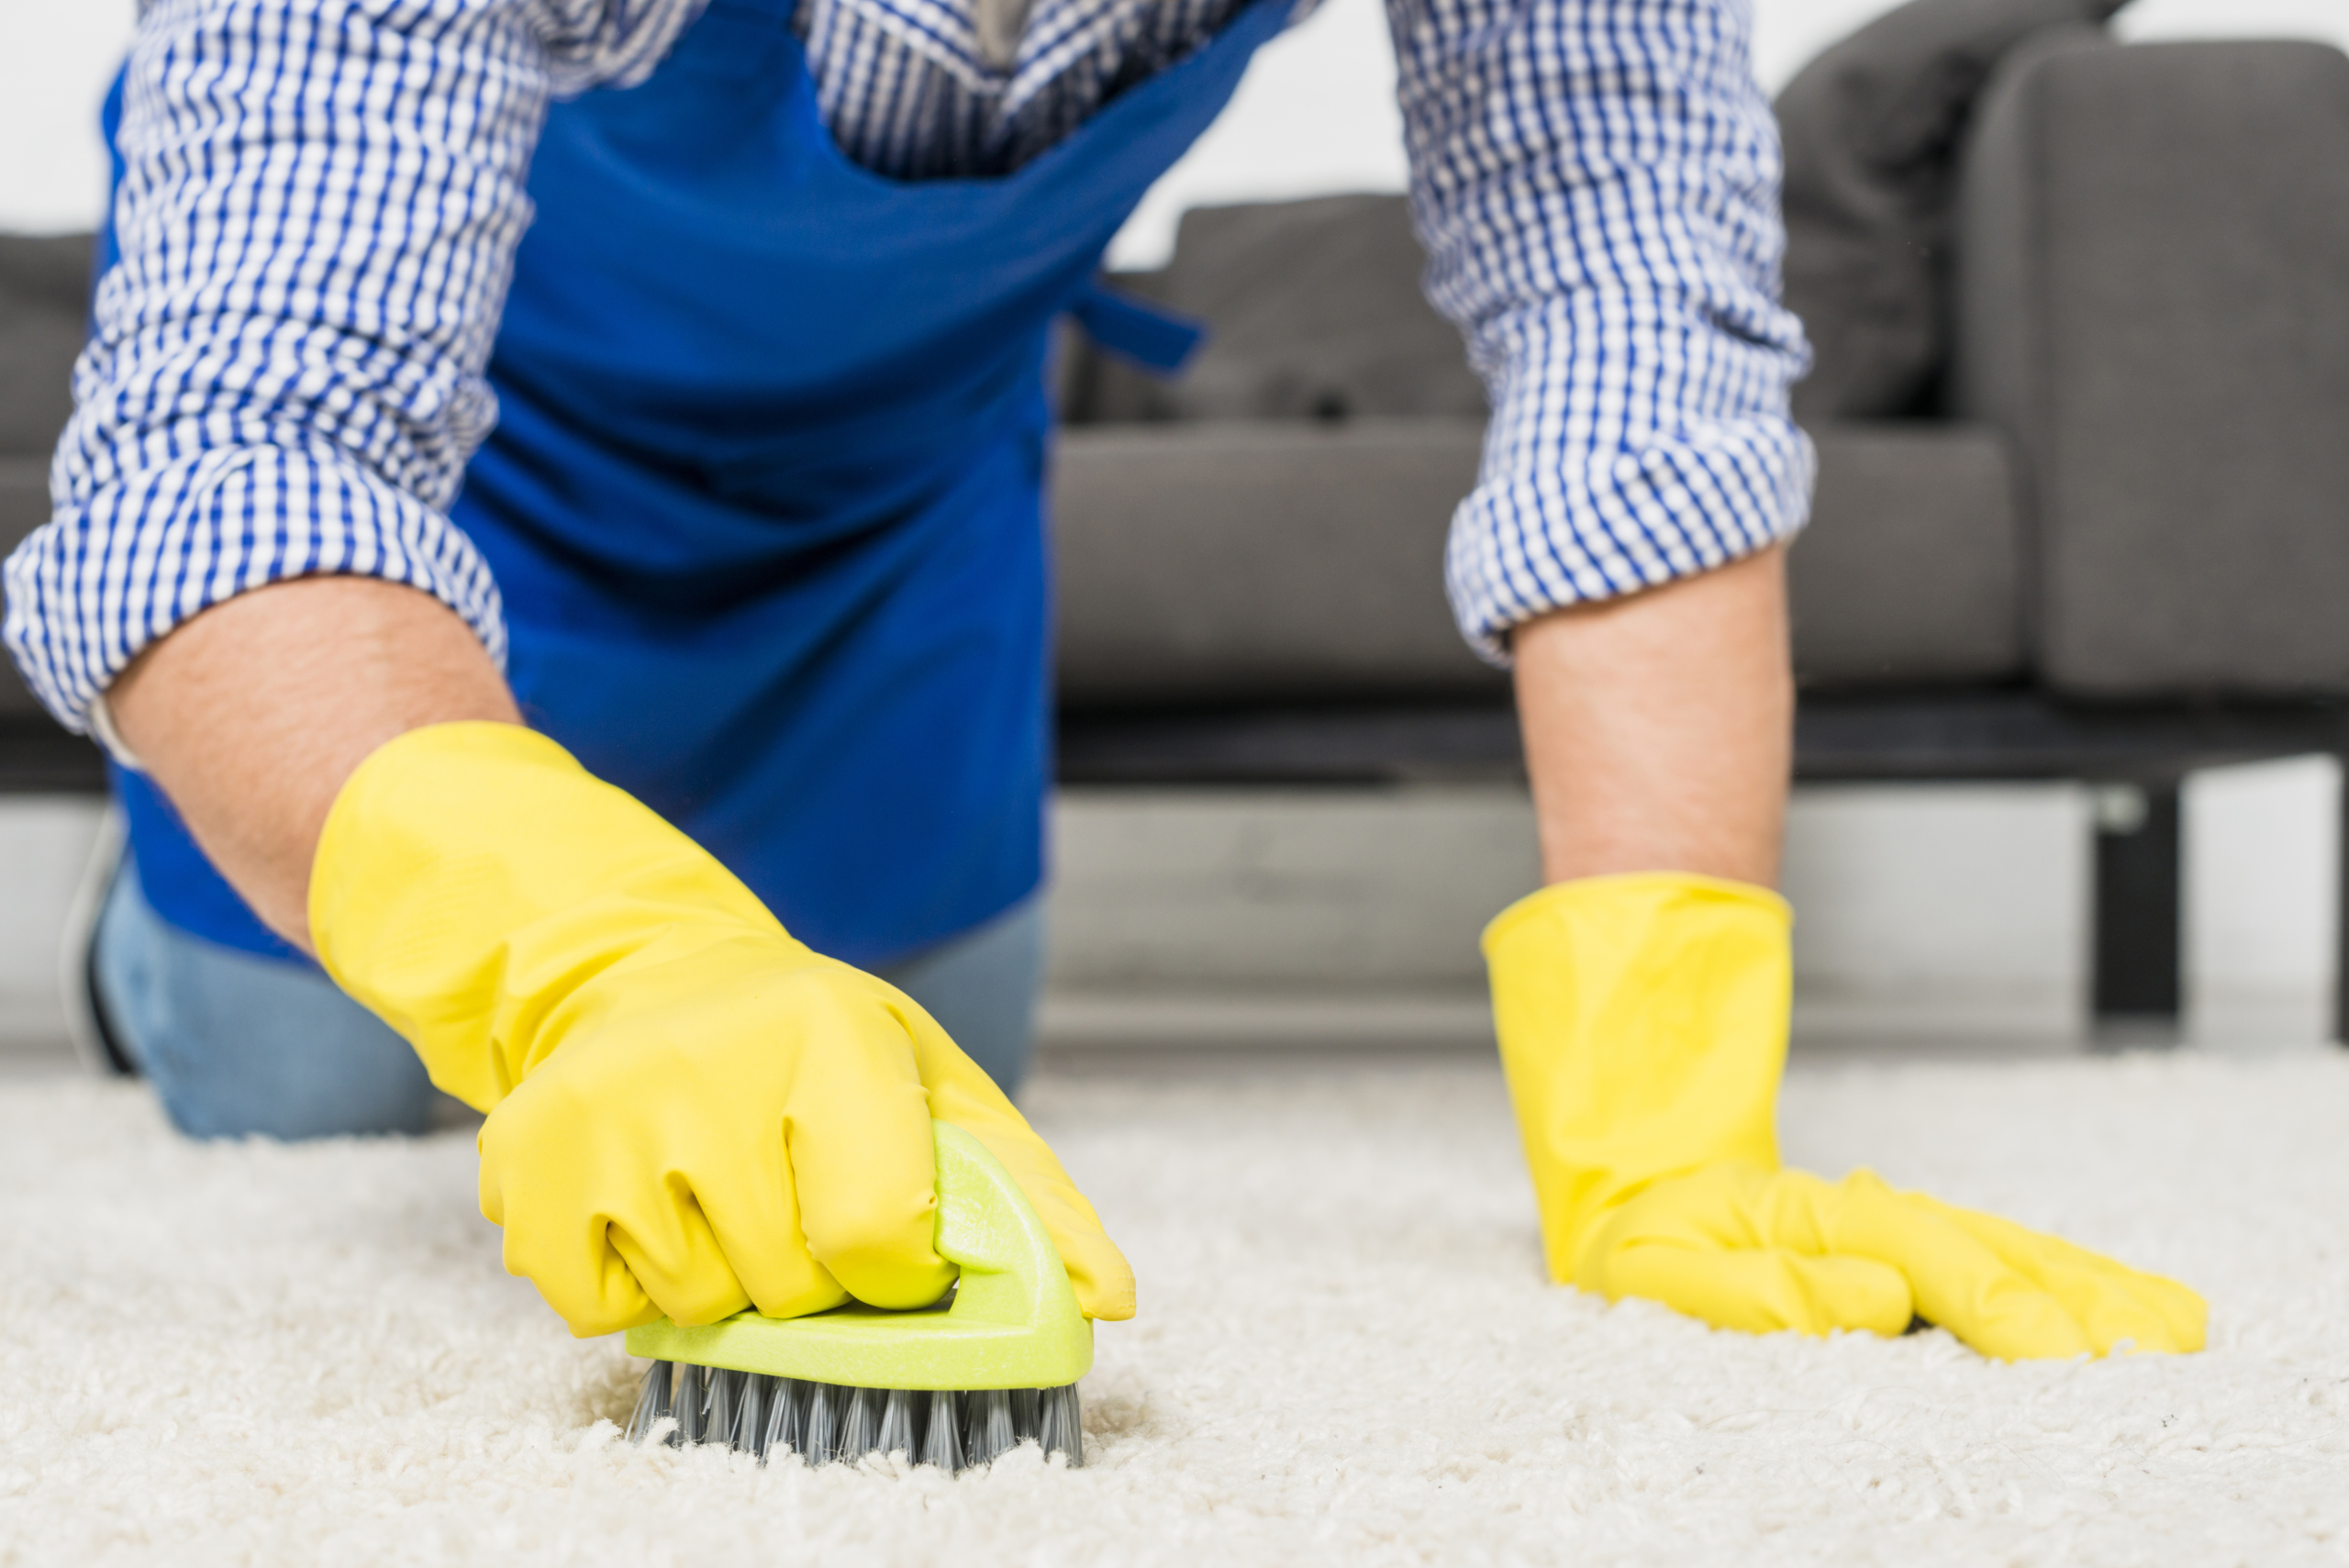 How Long Does it Take to Dry Carpet After Cleaning?